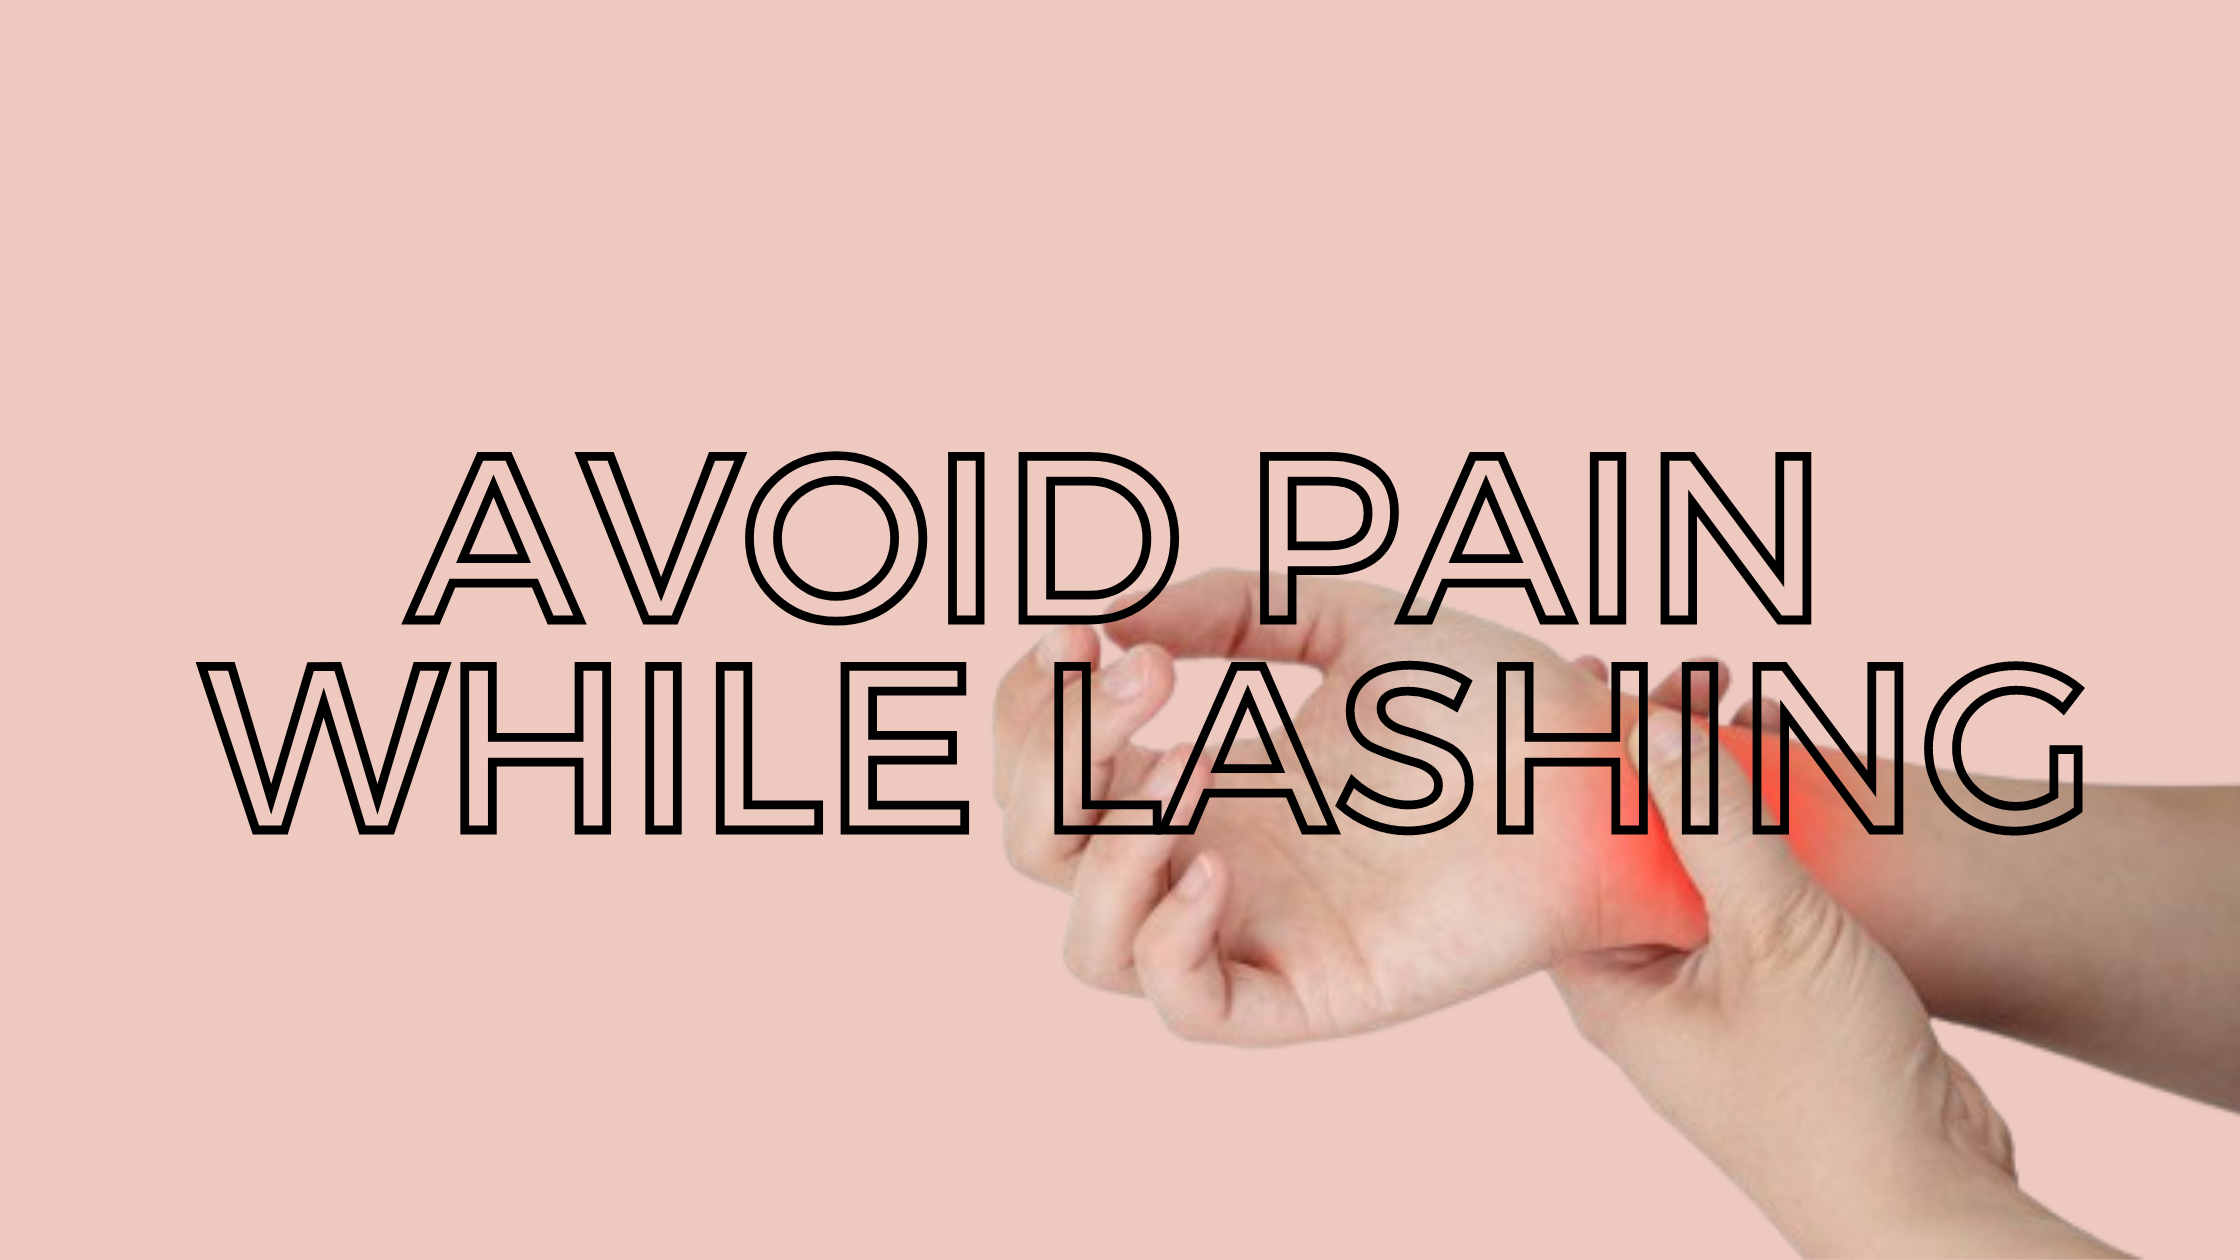 How to Avoid Pain While Lashing